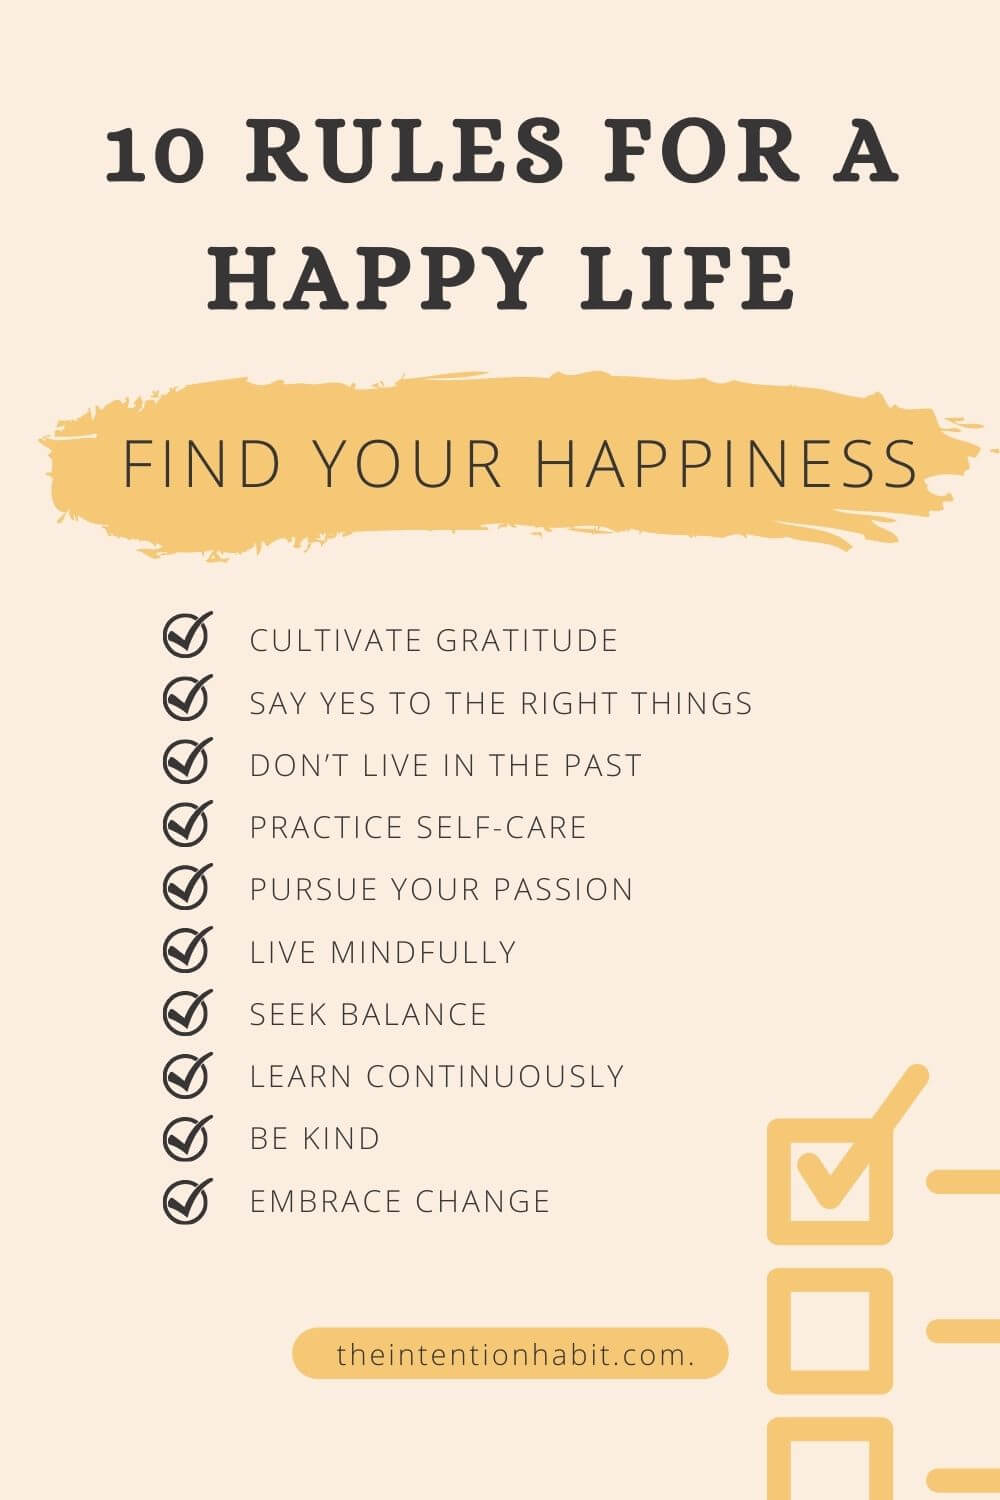 10 rules for a happy life list of rules